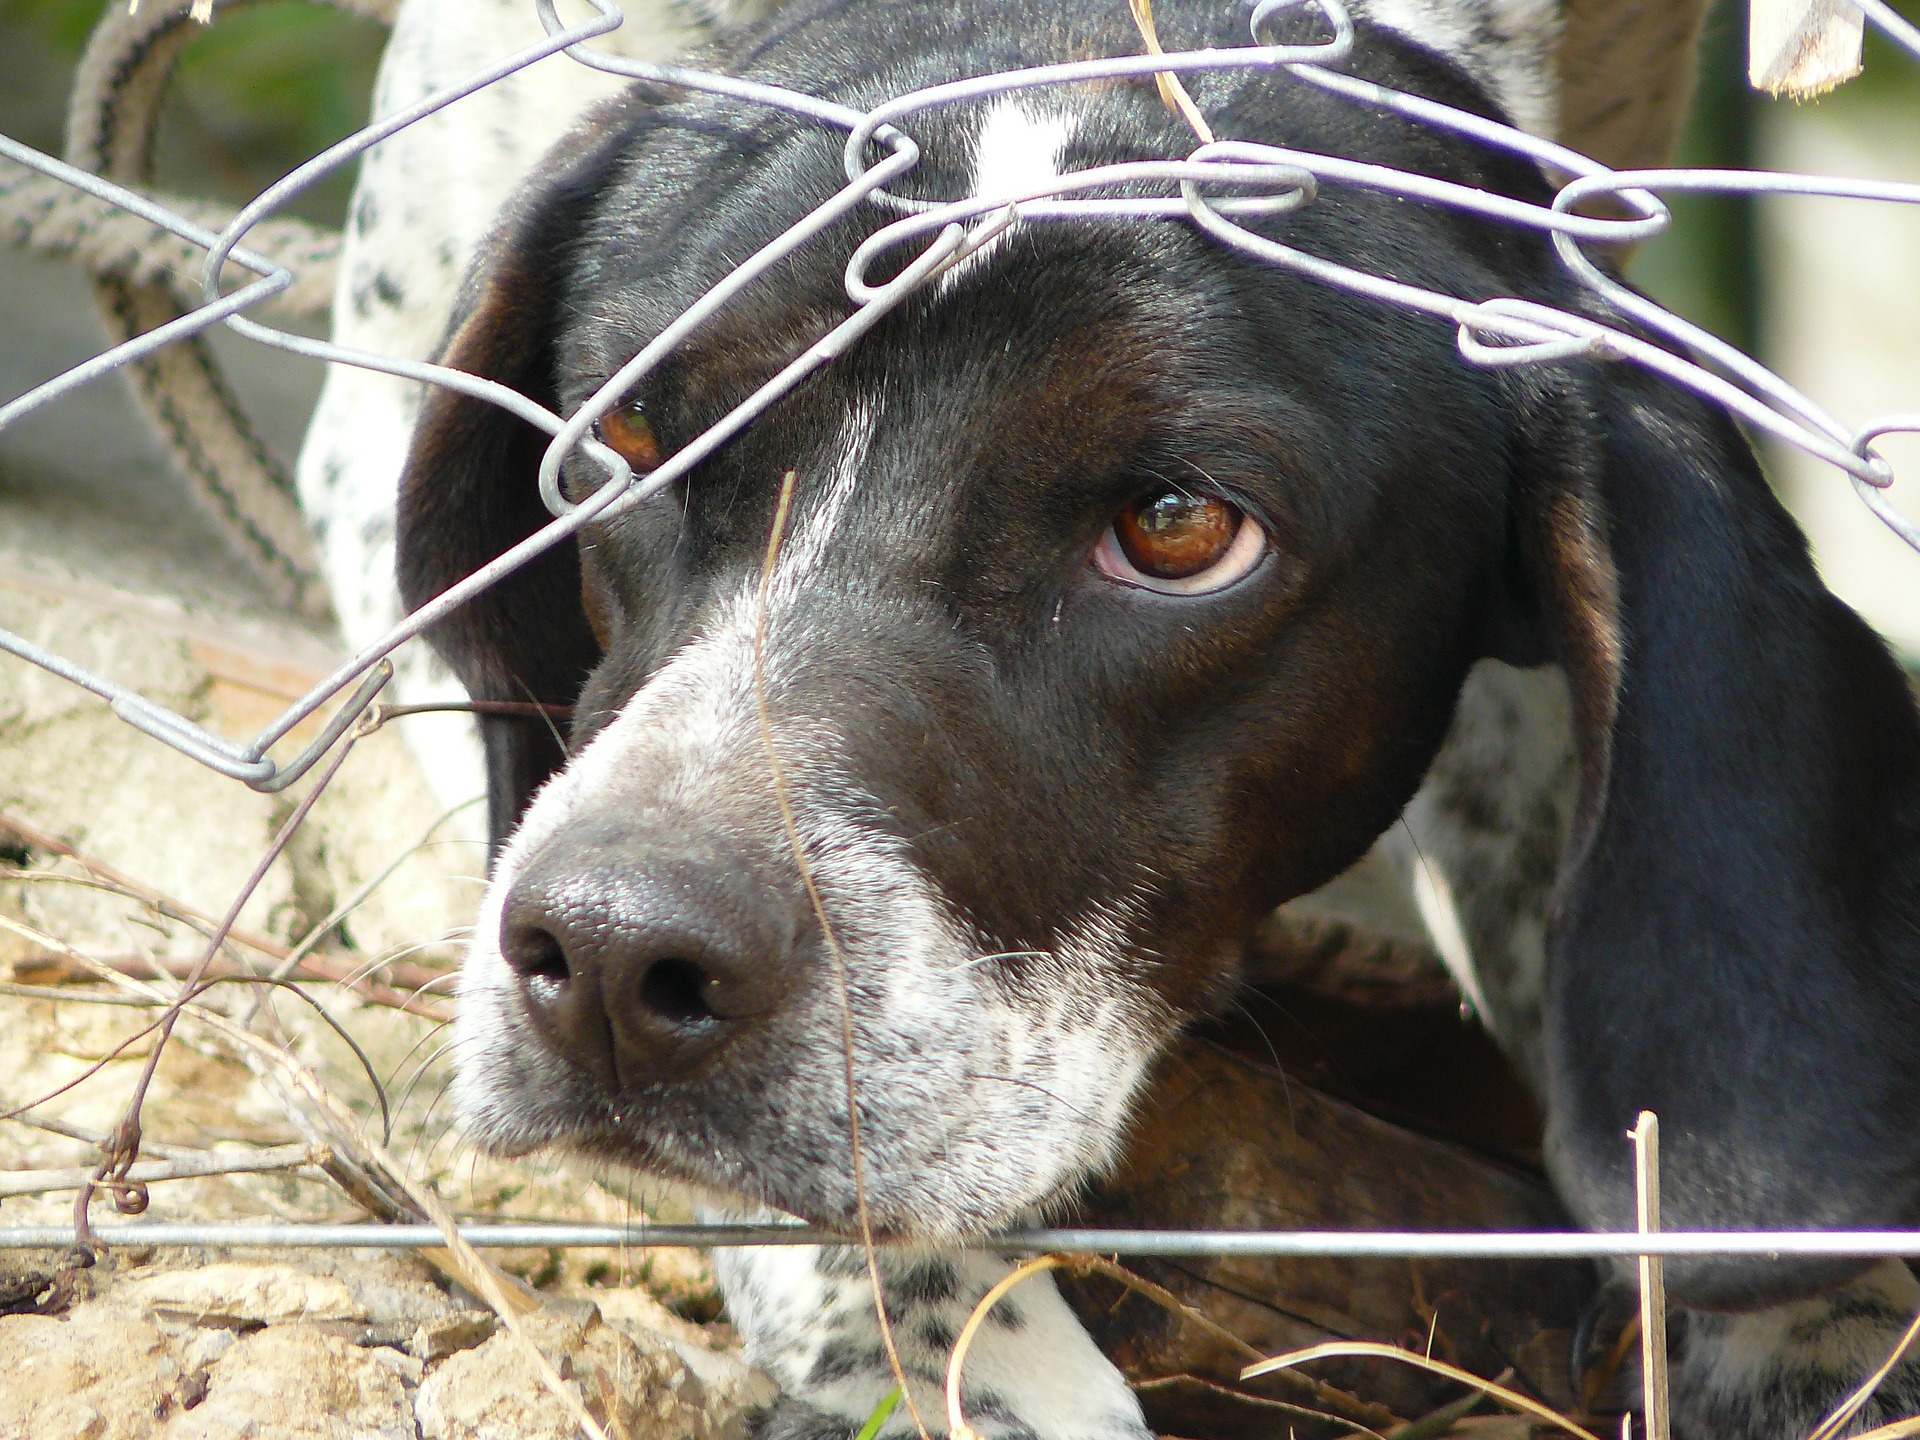 Brutal Animal Cruelty Cases Shock Hungary - Hungary Today